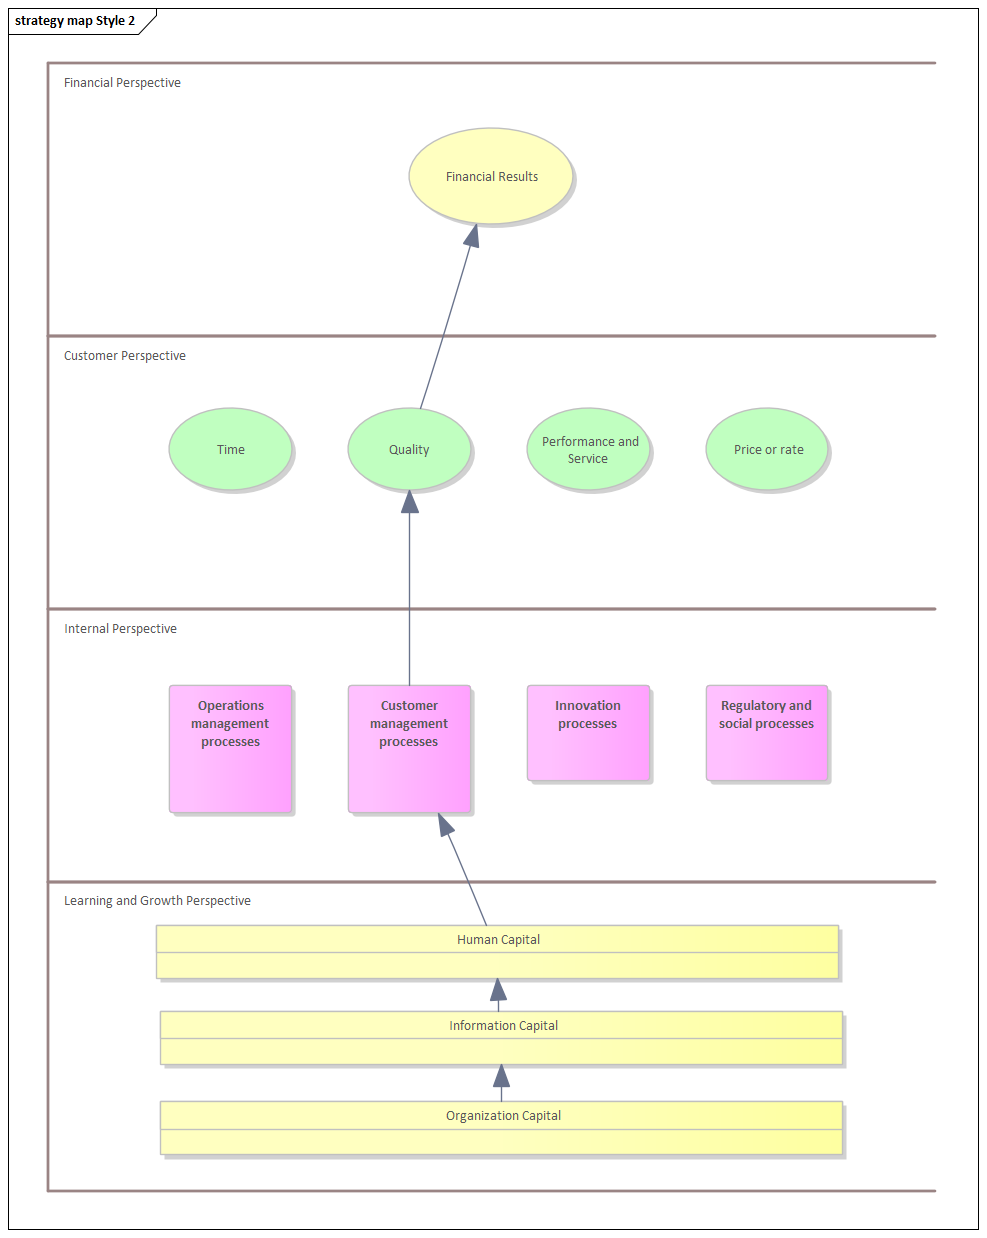 Business Strategy Map diagram (Style 2) in Sparx Systems Enterprise Architect